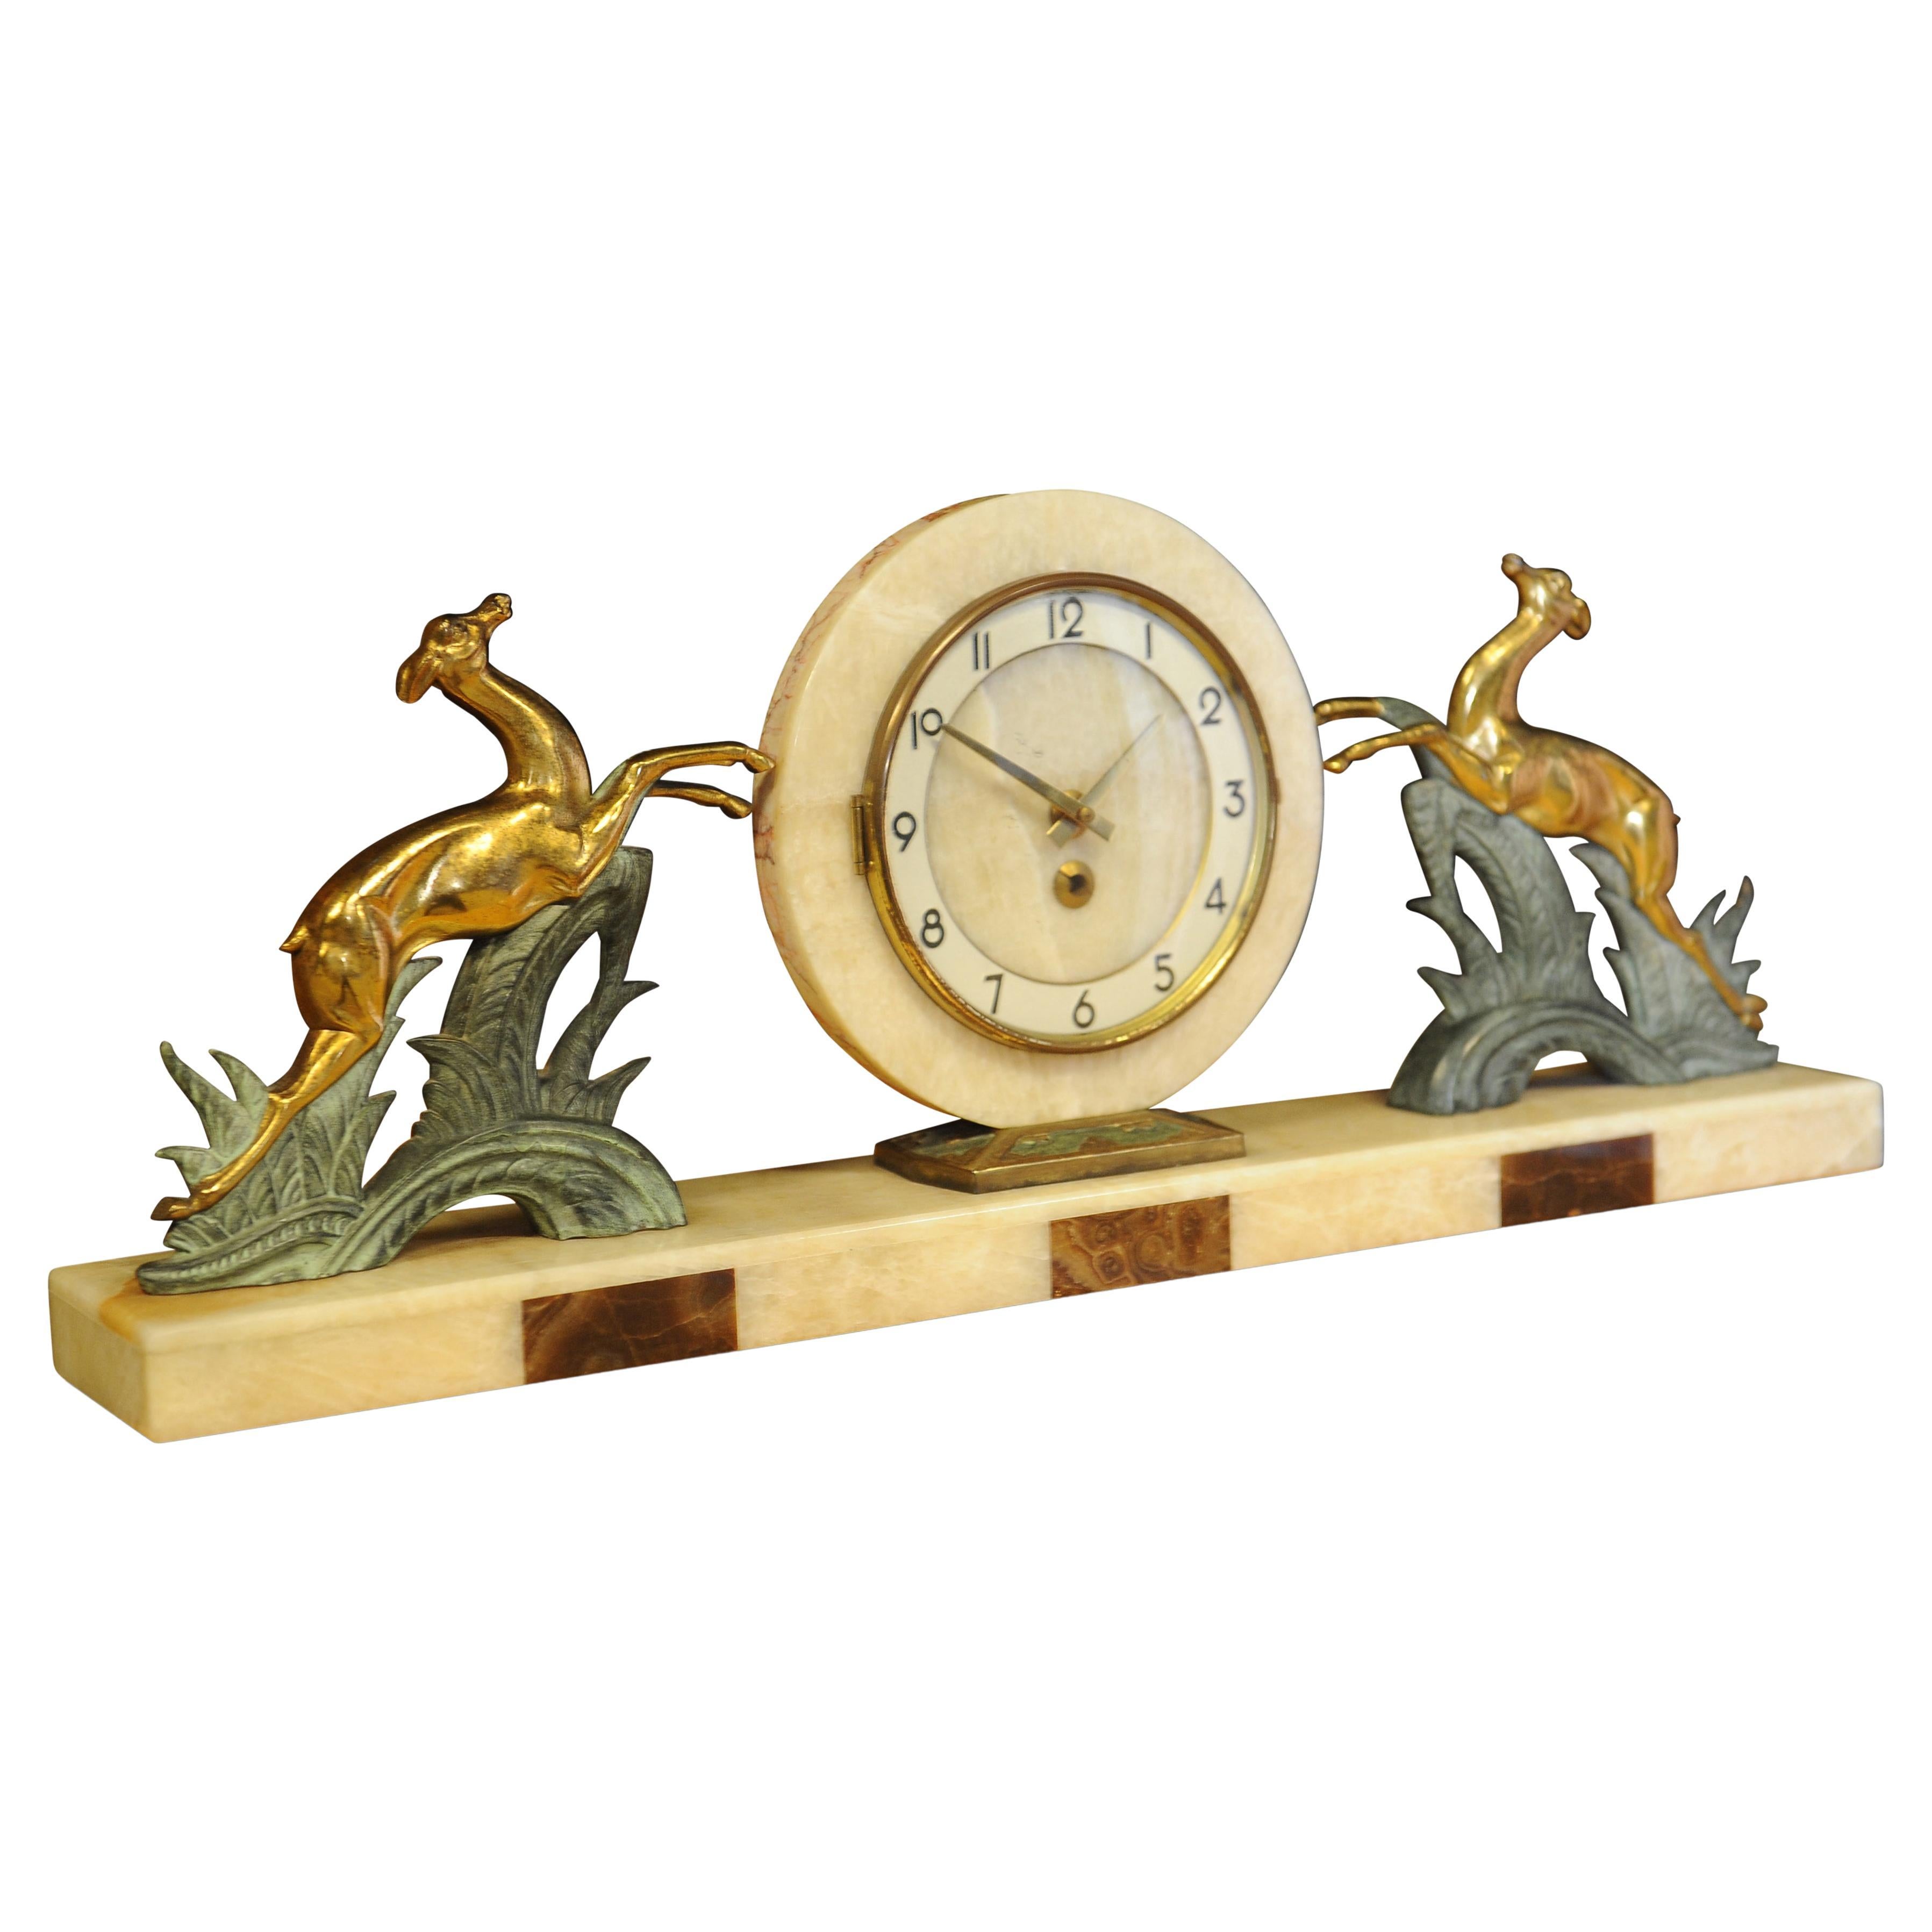 Art Deco Marble and Onyx Mantel Clock by Albert Villon for Bayard 1930s  For Sale